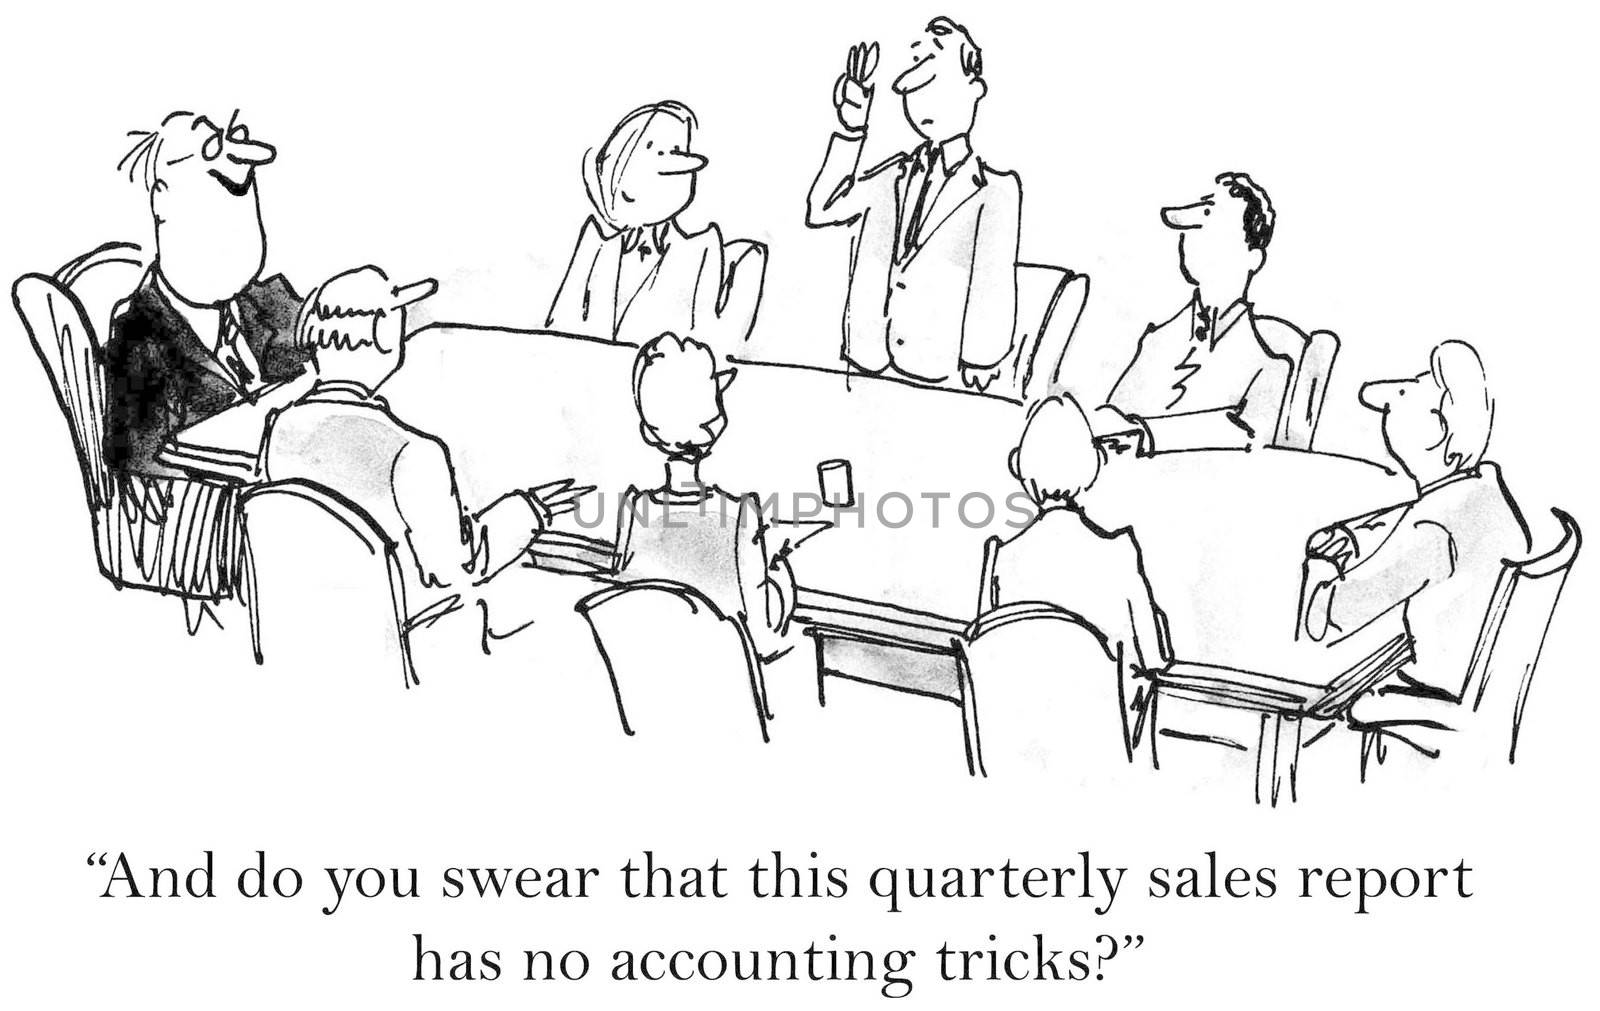 "And do you swear that this quarterly sales report has no accounting tricks?"